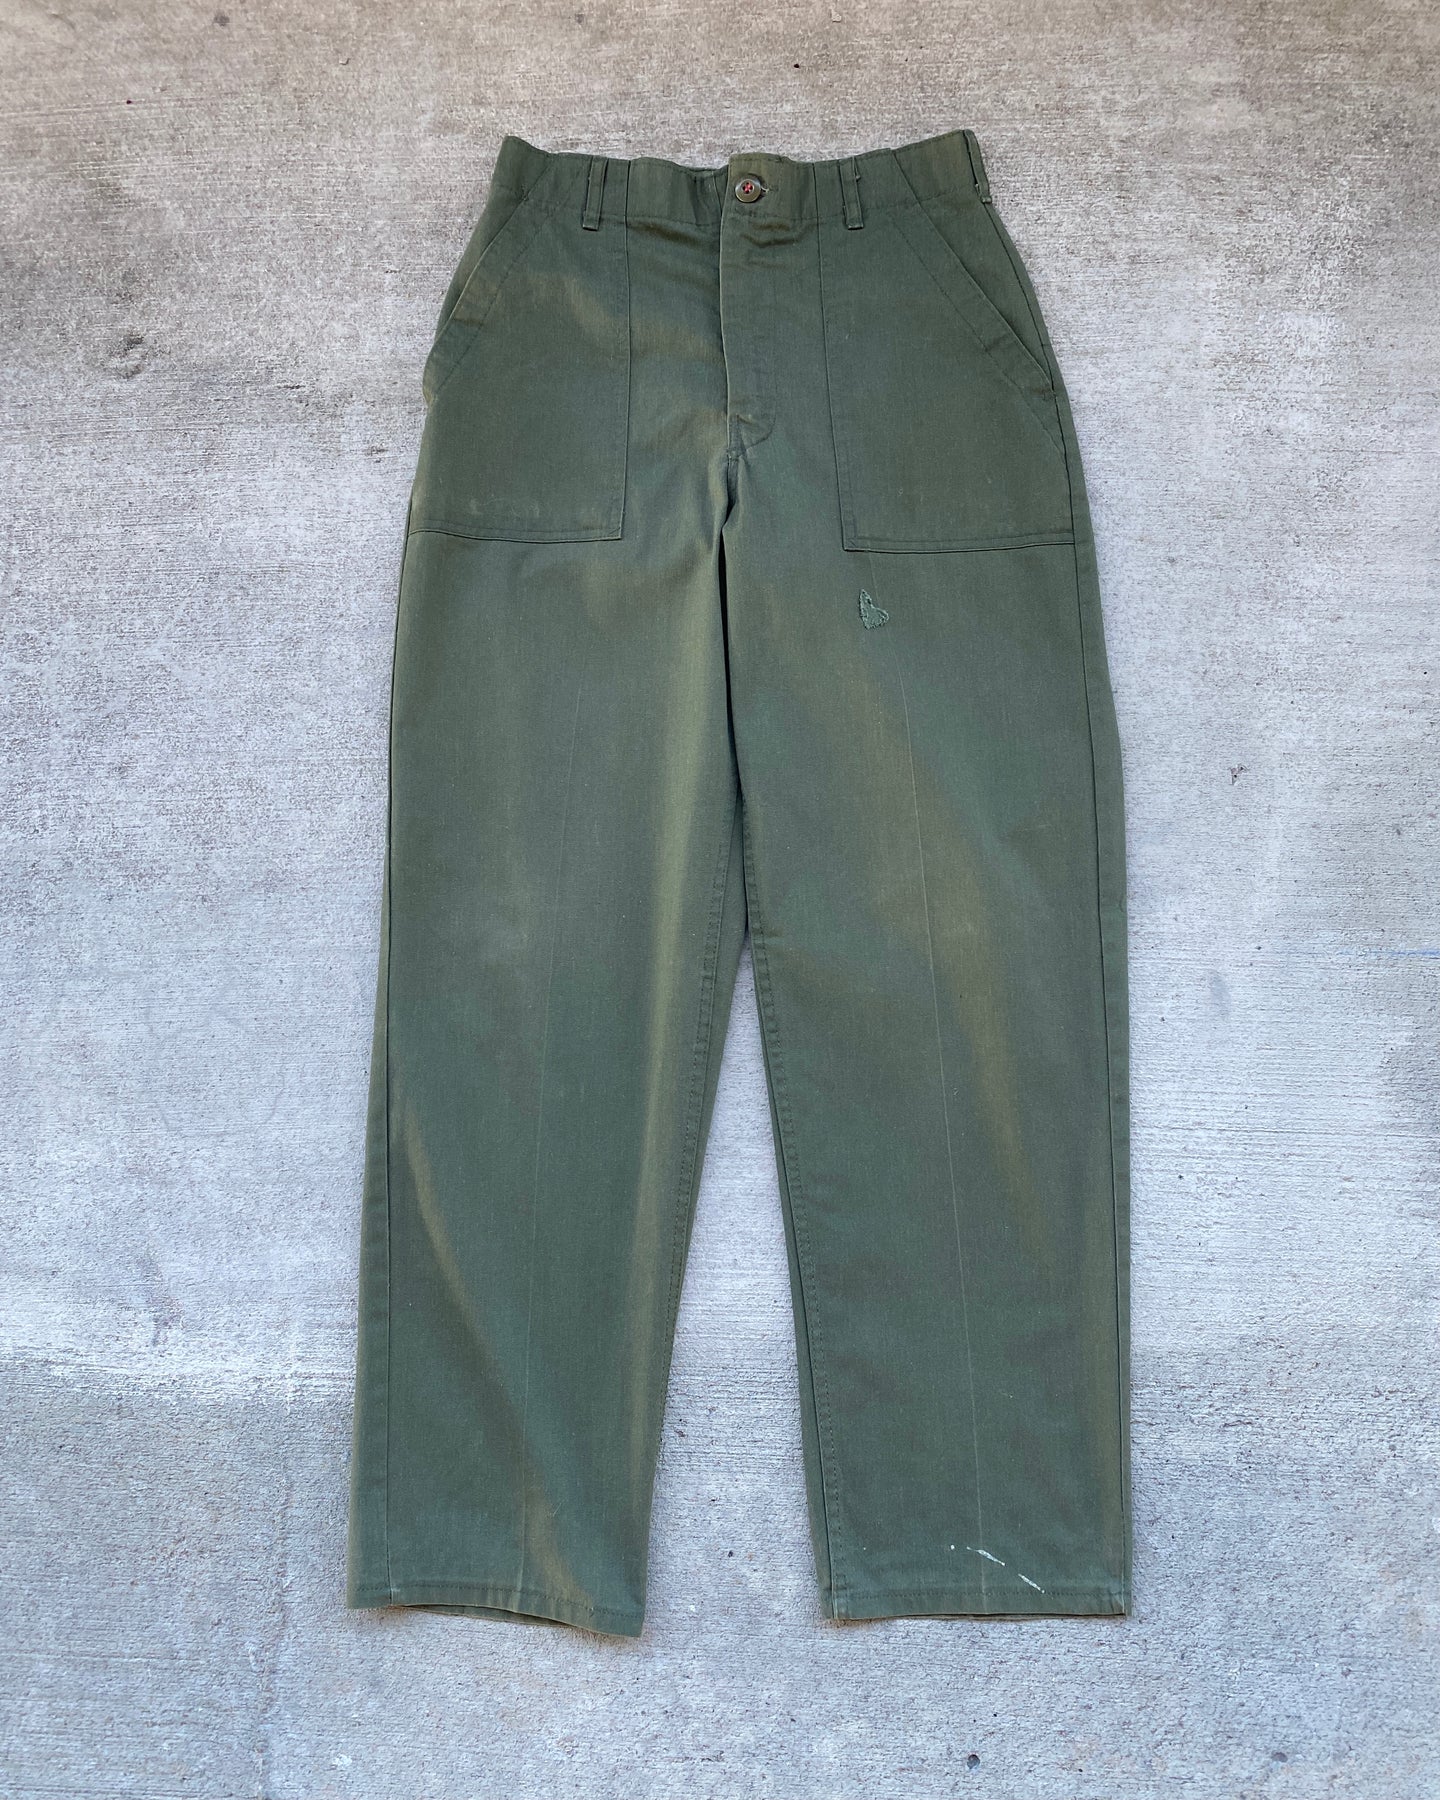 1970s Repaired OG-107 Military Pant - Size 28 x 29